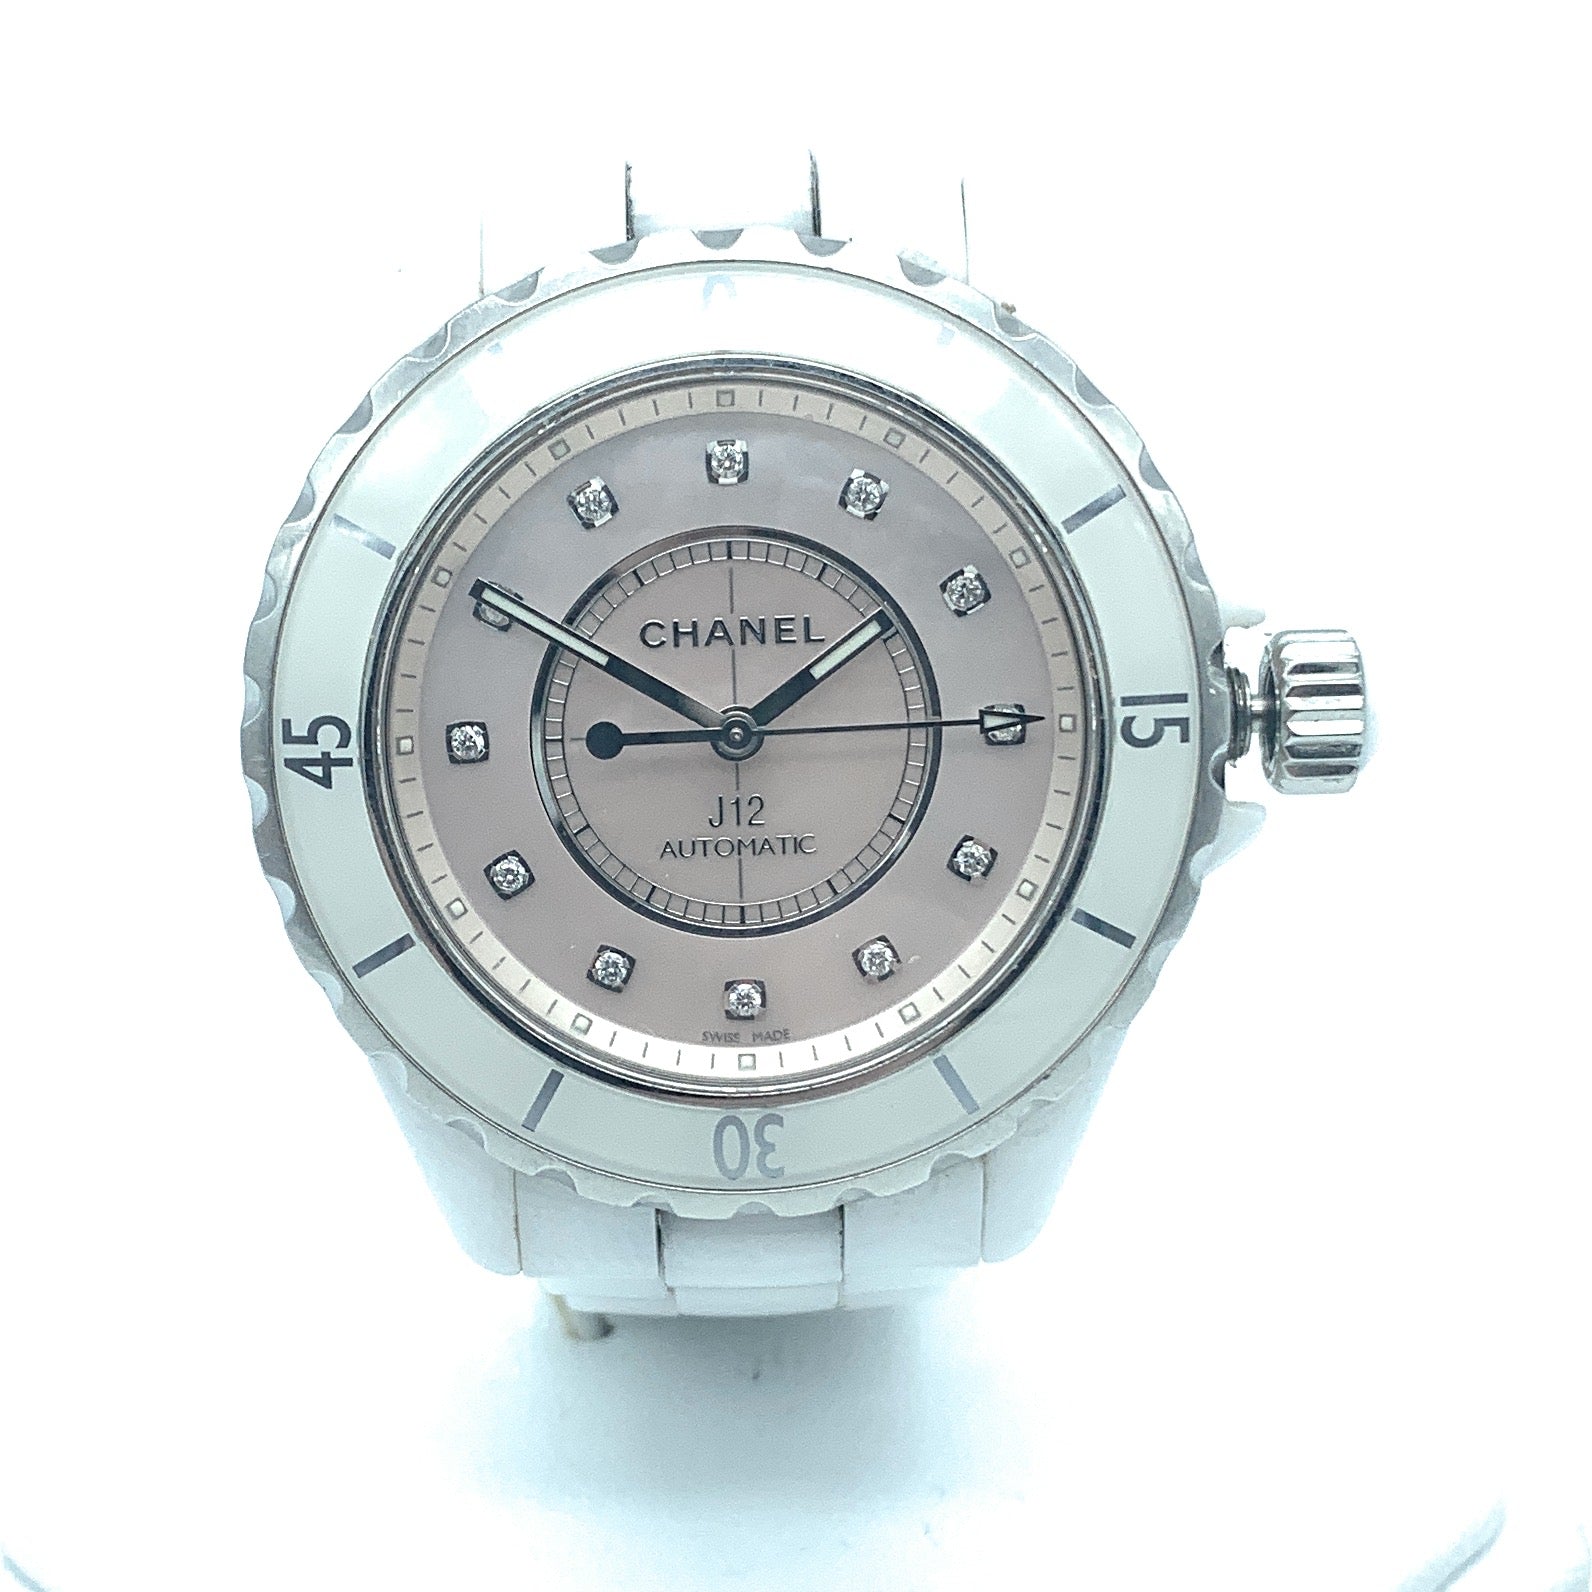 Pre-Owned Chanel J12 Women's 38mm Automatic White Ceramic Watch